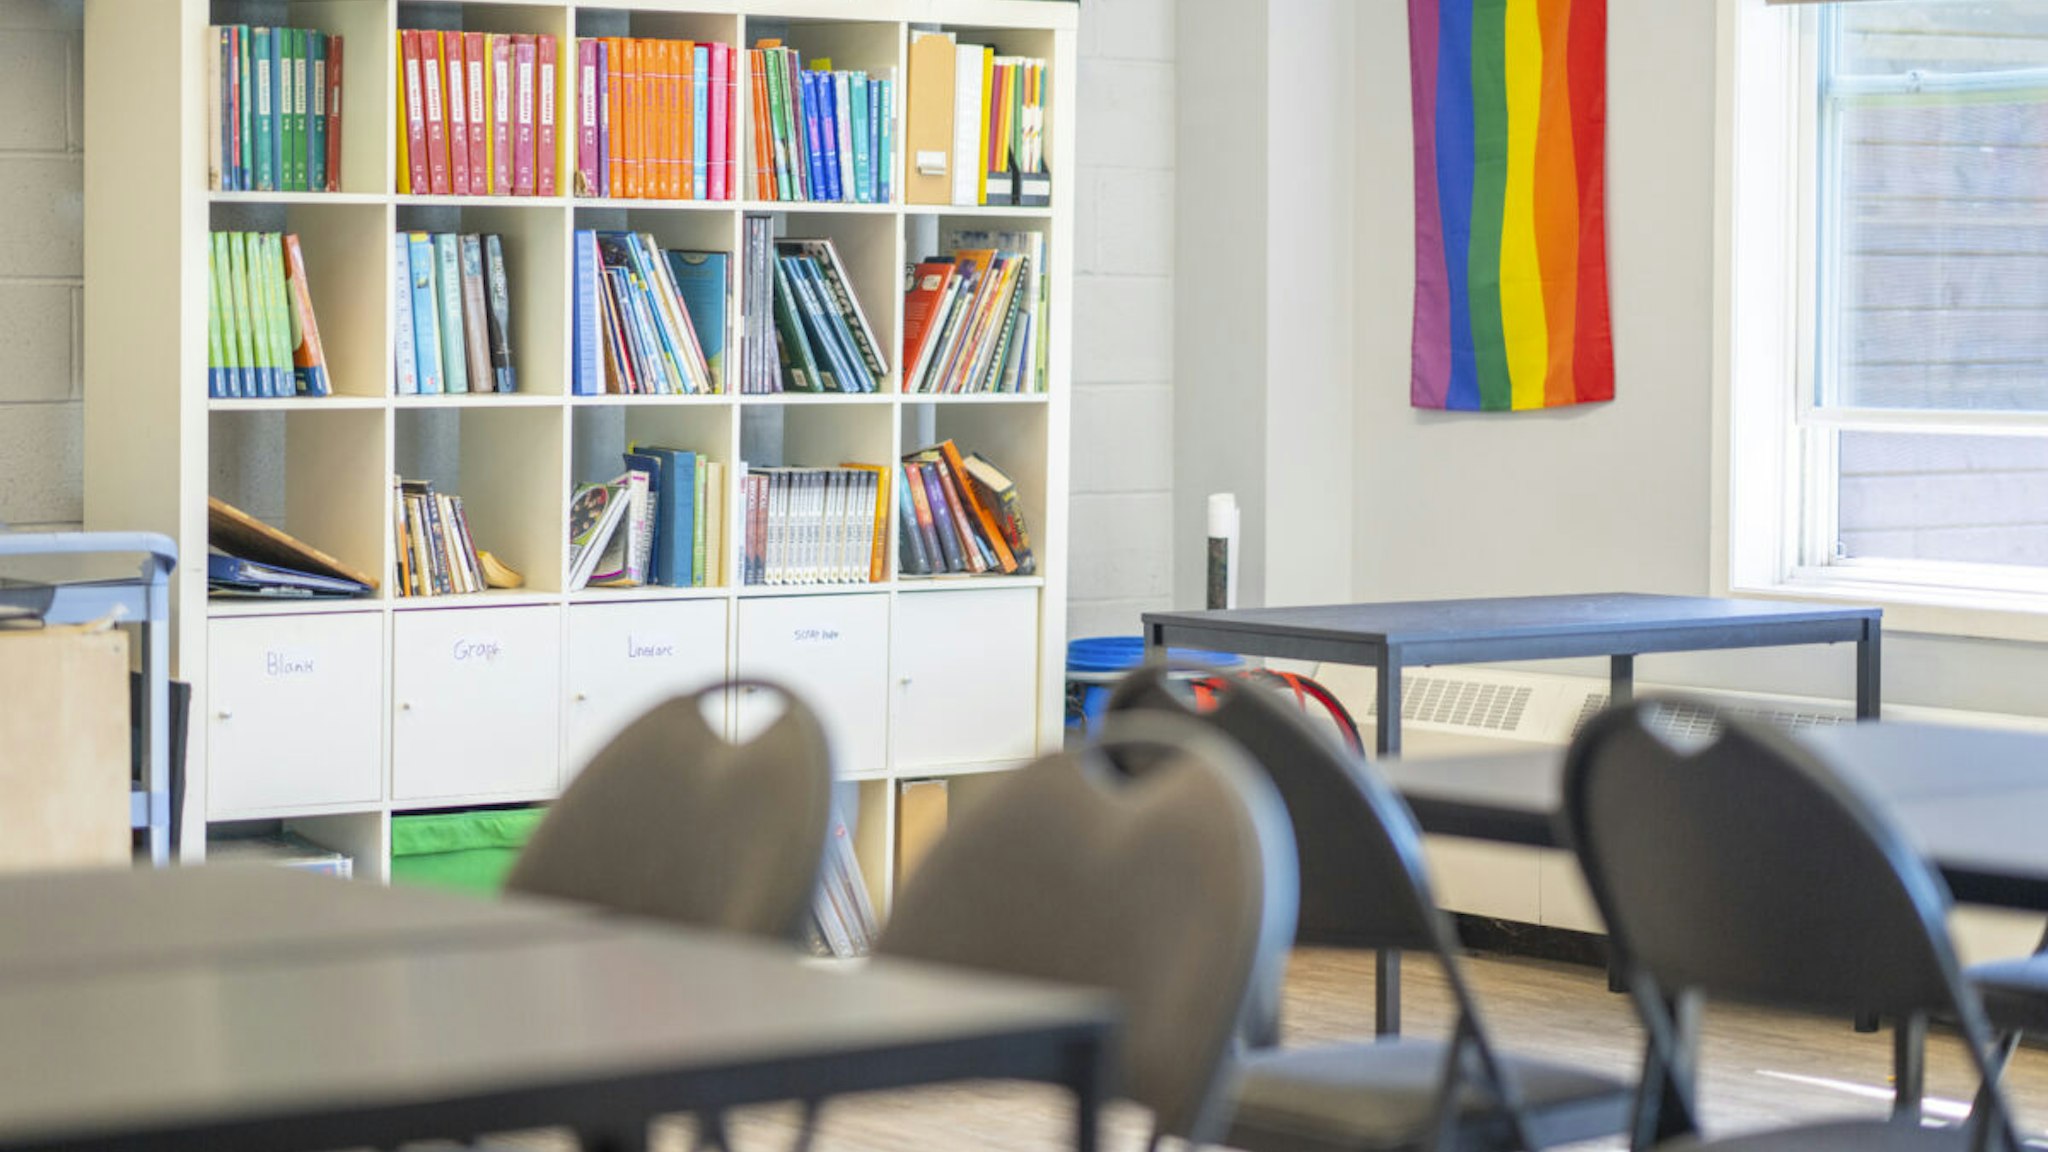 A teachers corner of a Montessori classroom with bookshelves containing binders and textbooks, a small desk and a pride flag on the wall. Empty student desks can be seen in the foreground.